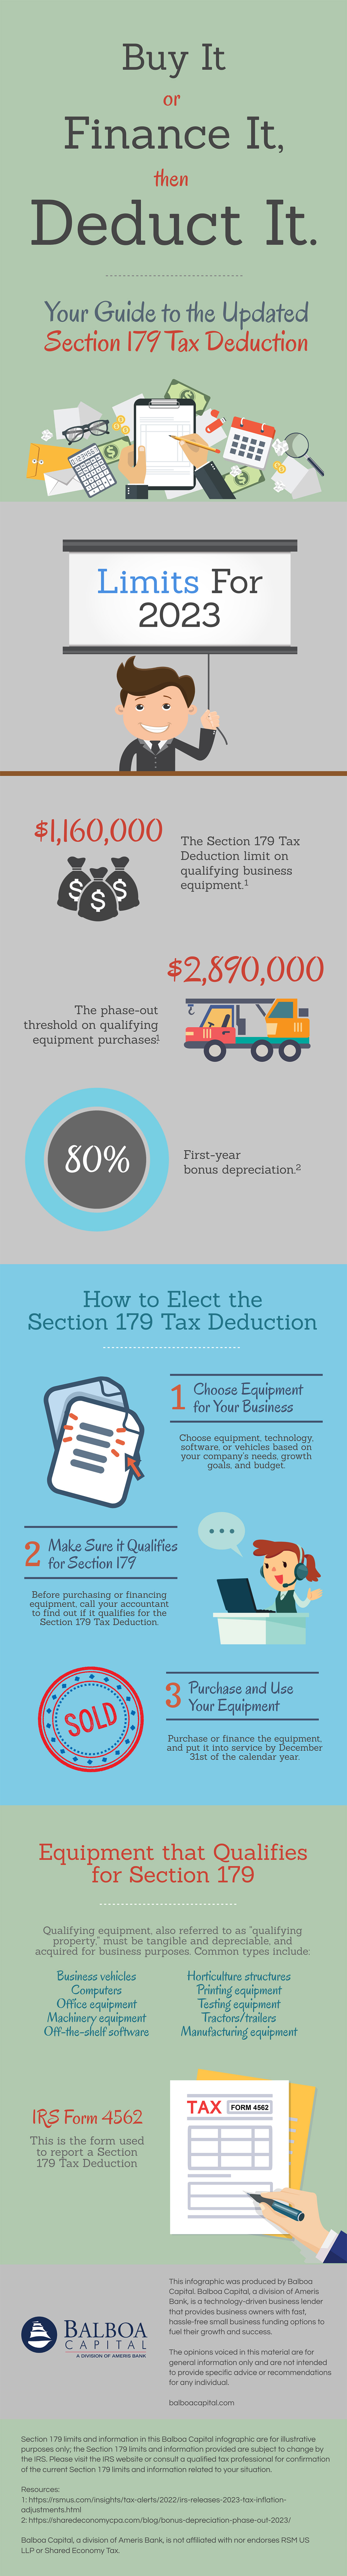 Section 179 Tax Deduction Infographic